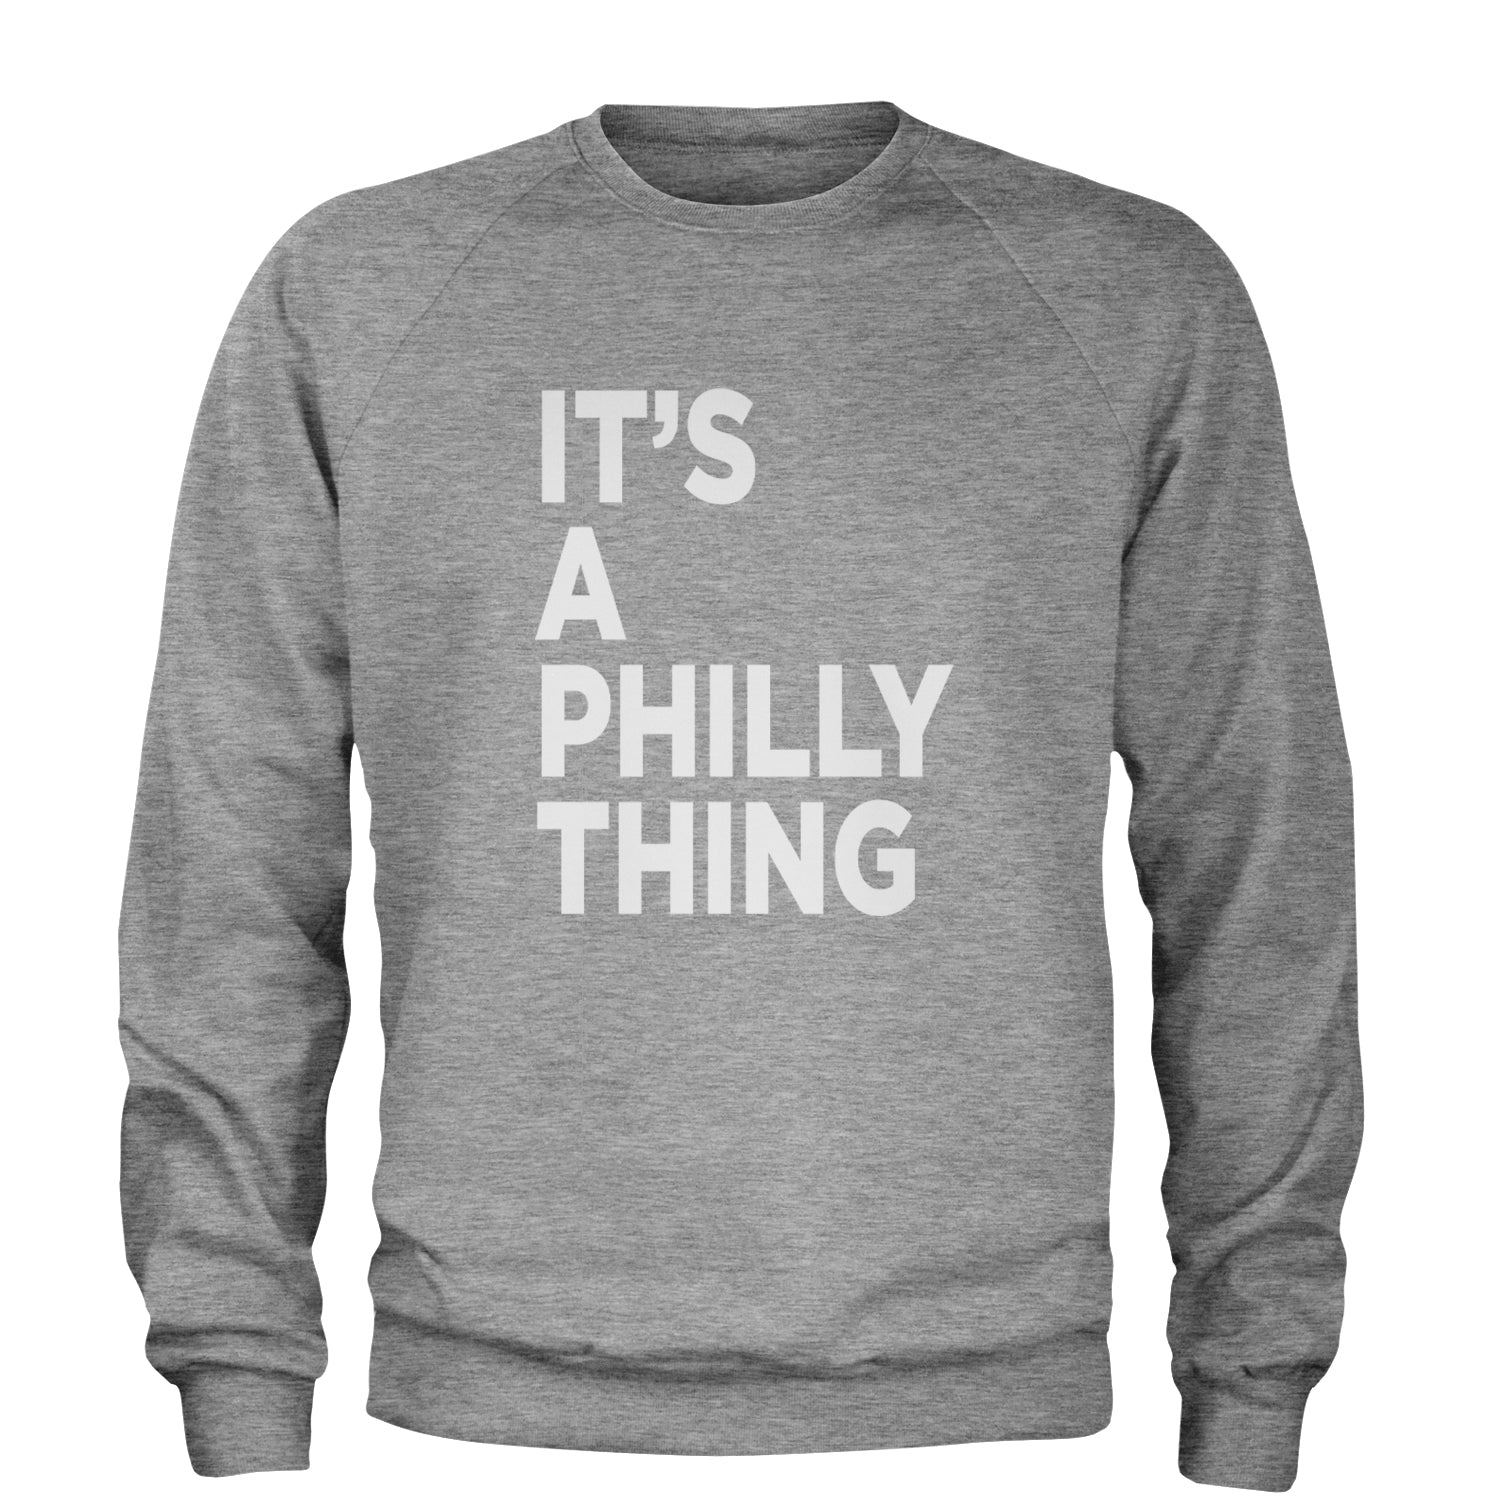 PHILLY It's A Philly Thing Adult Crewneck Sweatshirt baseball, dilly, filly, football, jawn, morgan, Philadelphia, philli by Expression Tees